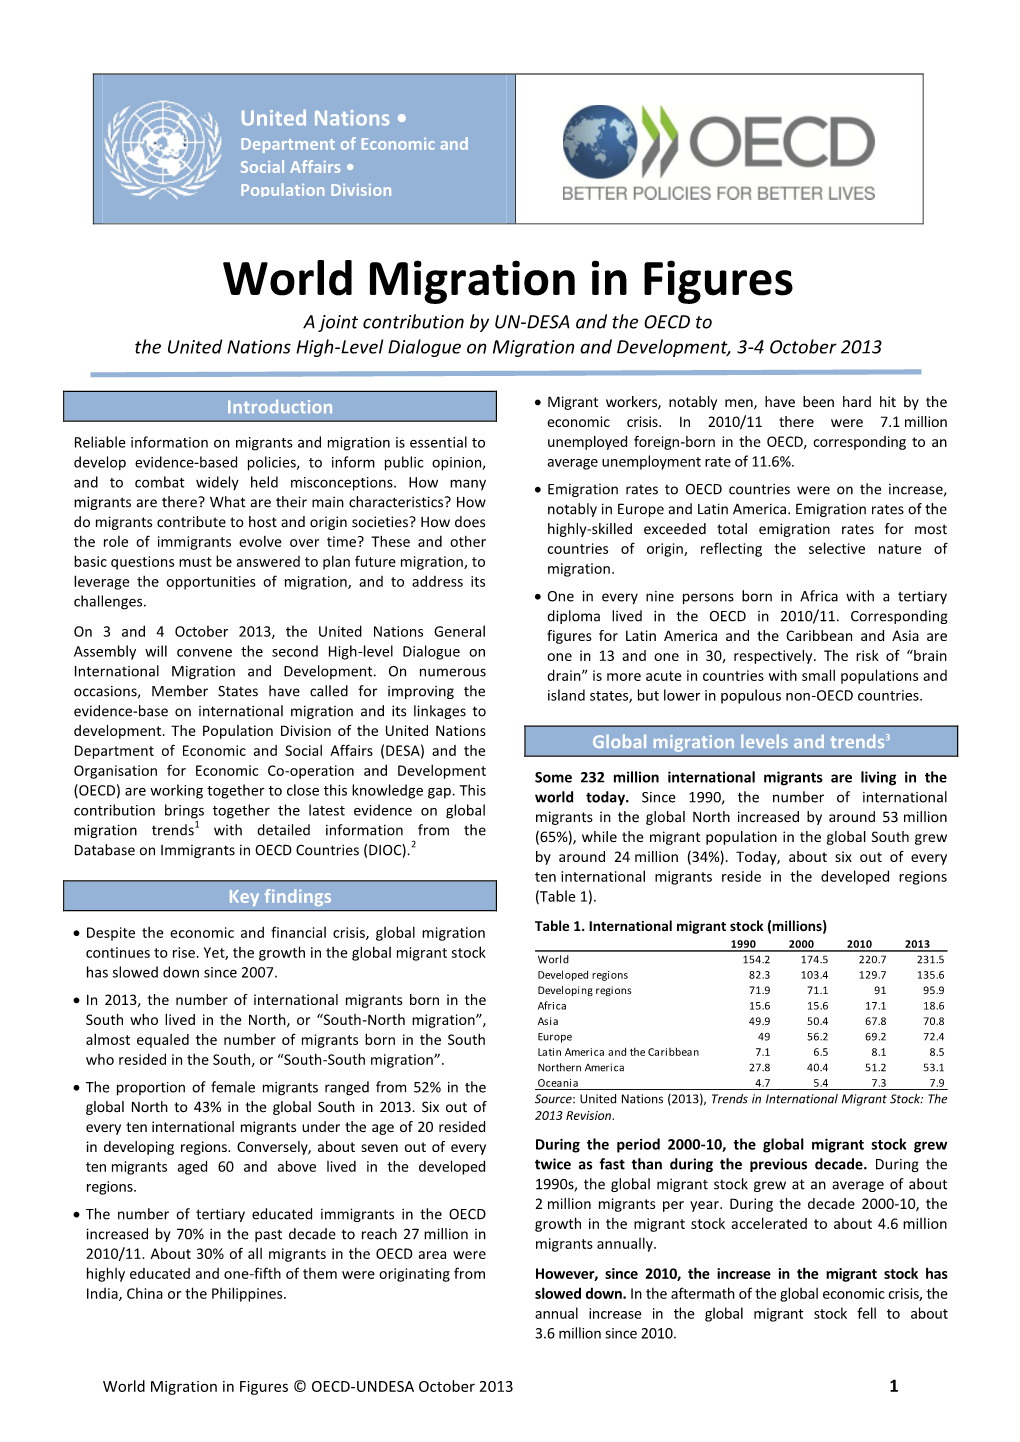 World Migration in Figures a Joint Contribution by UN-DESA and the OECD to the United Nations High-Level Dialogue on Migration and Development, 3-4 October 2013